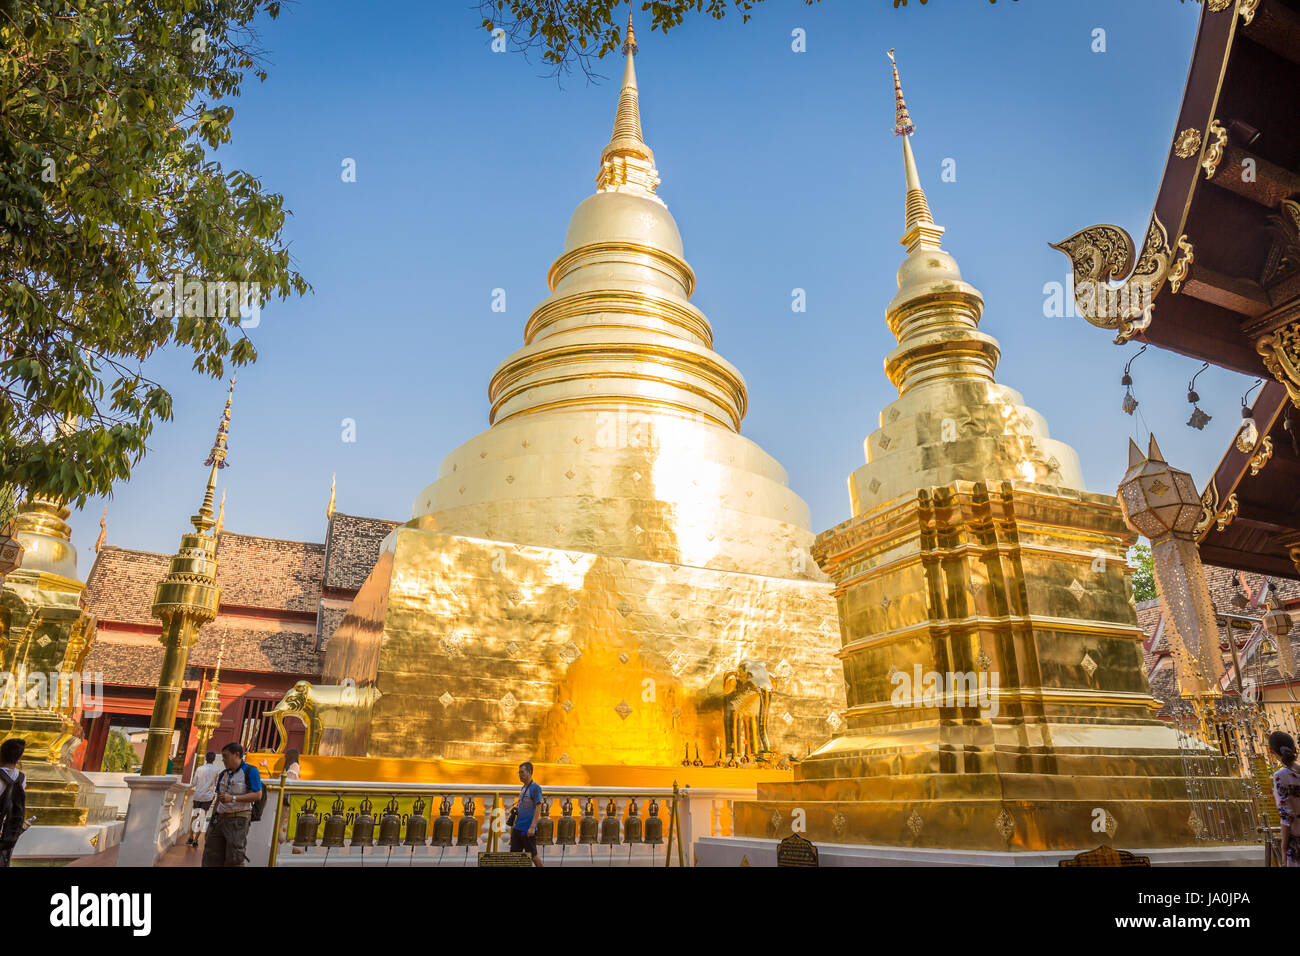 CHIANG MAI , THAILAND - MARCH 5, 2017 : Wat Phra Singh Woramahaviharn temple is located in the old city centre of Chiang Mai, Thailand on March 5 2017 Stock Photo